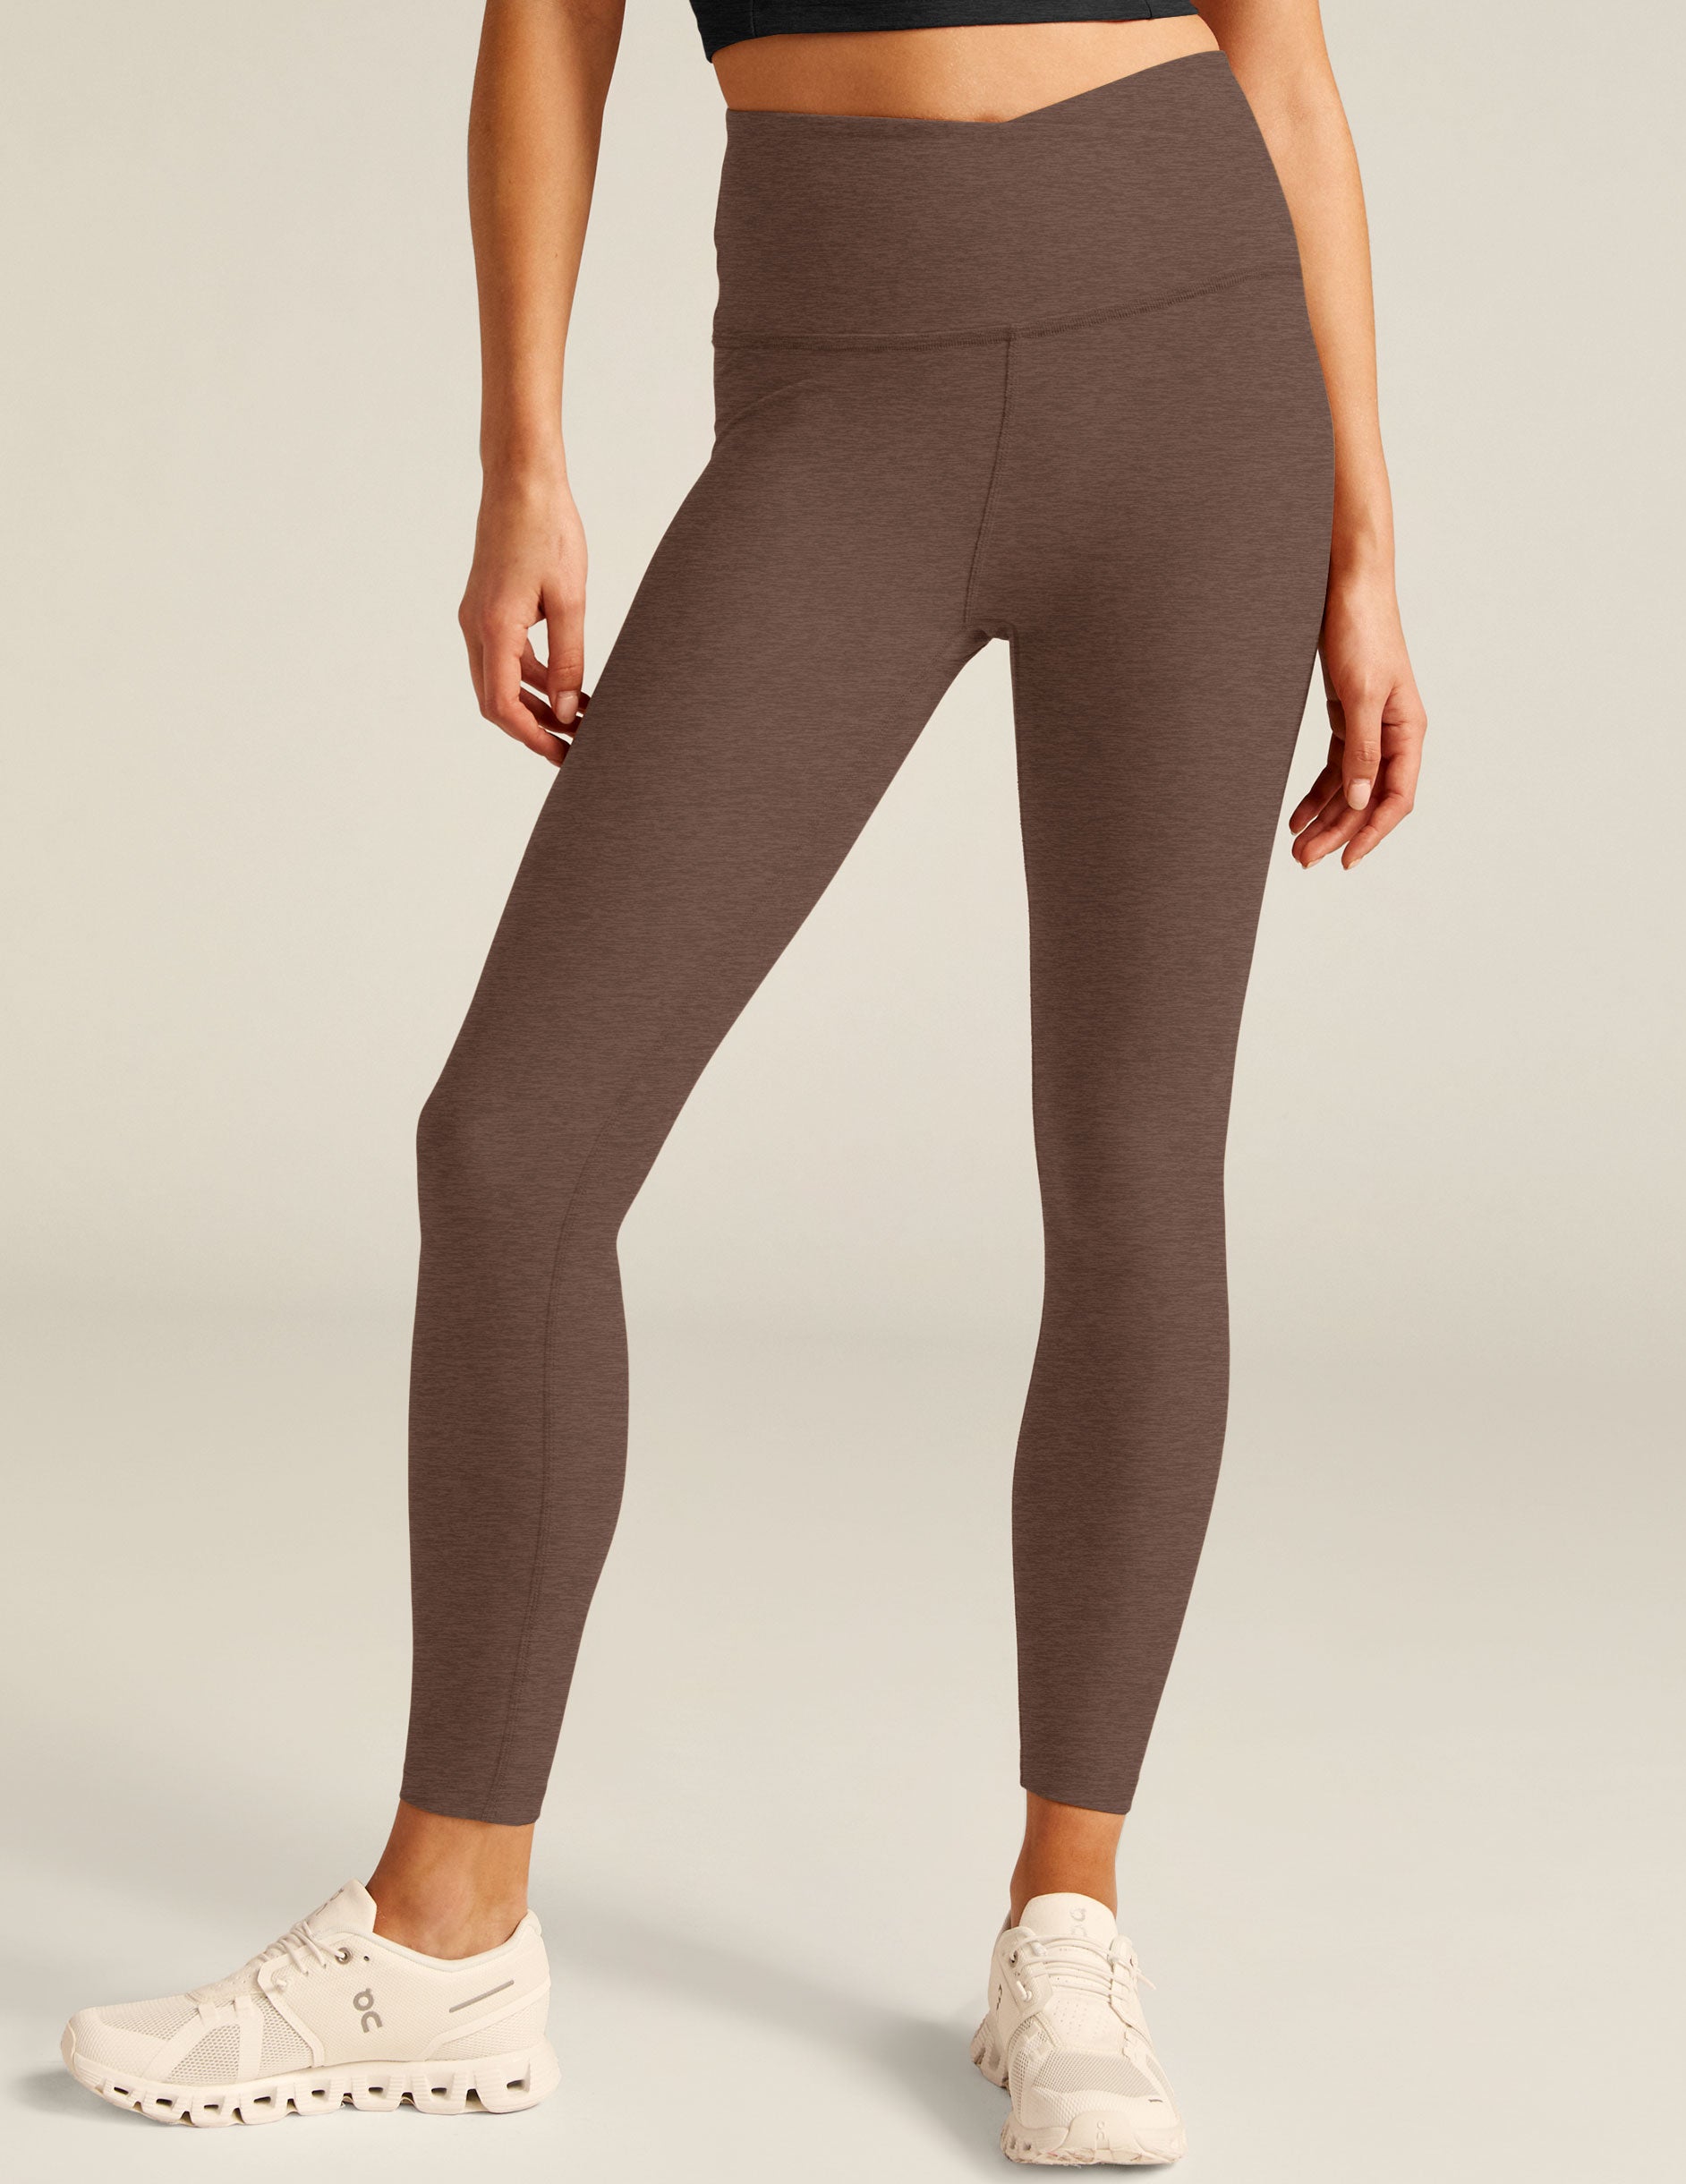 Beyond Yoga High-Waisted Midi Leggings  Anthropologie Singapore - Women's  Clothing, Accessories & Home